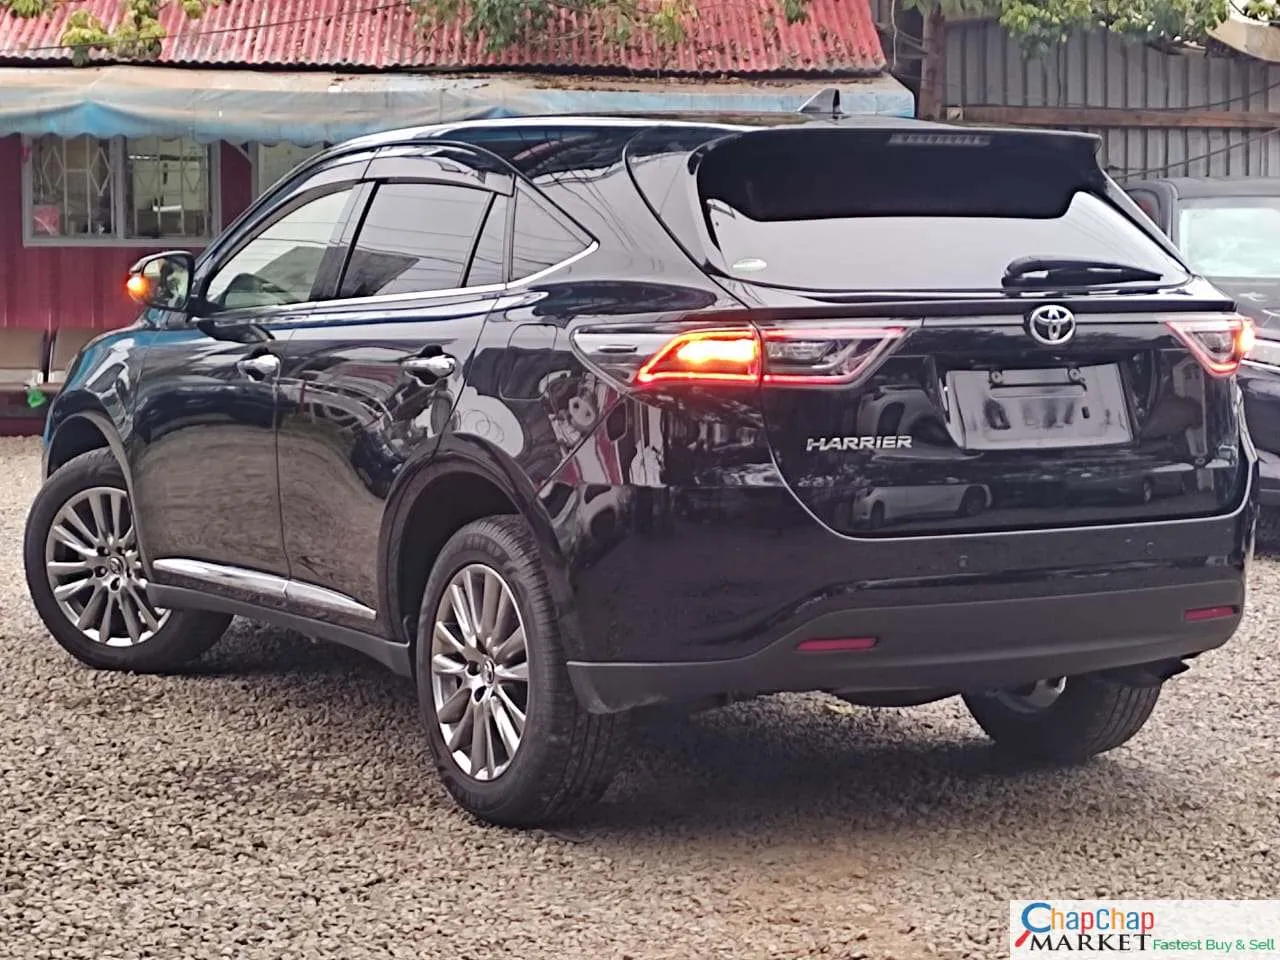 Toyota Harrier for Sale in Kenya Just Arrived Hire Purchase Installments Trade in OK EXCLUSIVE 🔥 🚒